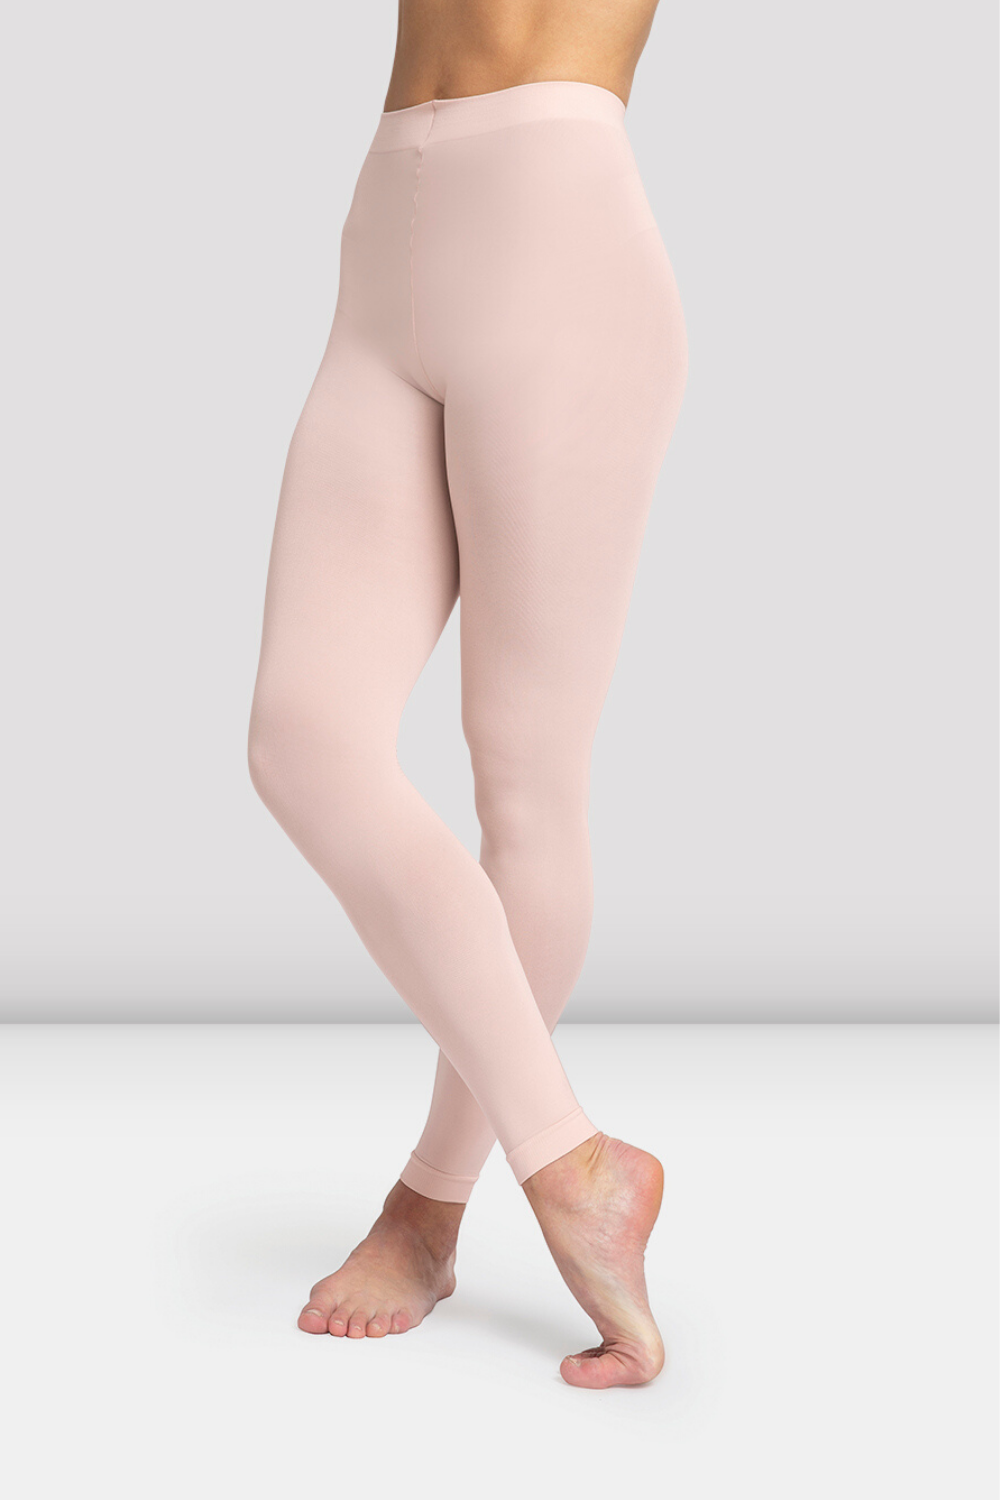 ContourSoft Footed Youth Tights by Bloch – Dancer's Image